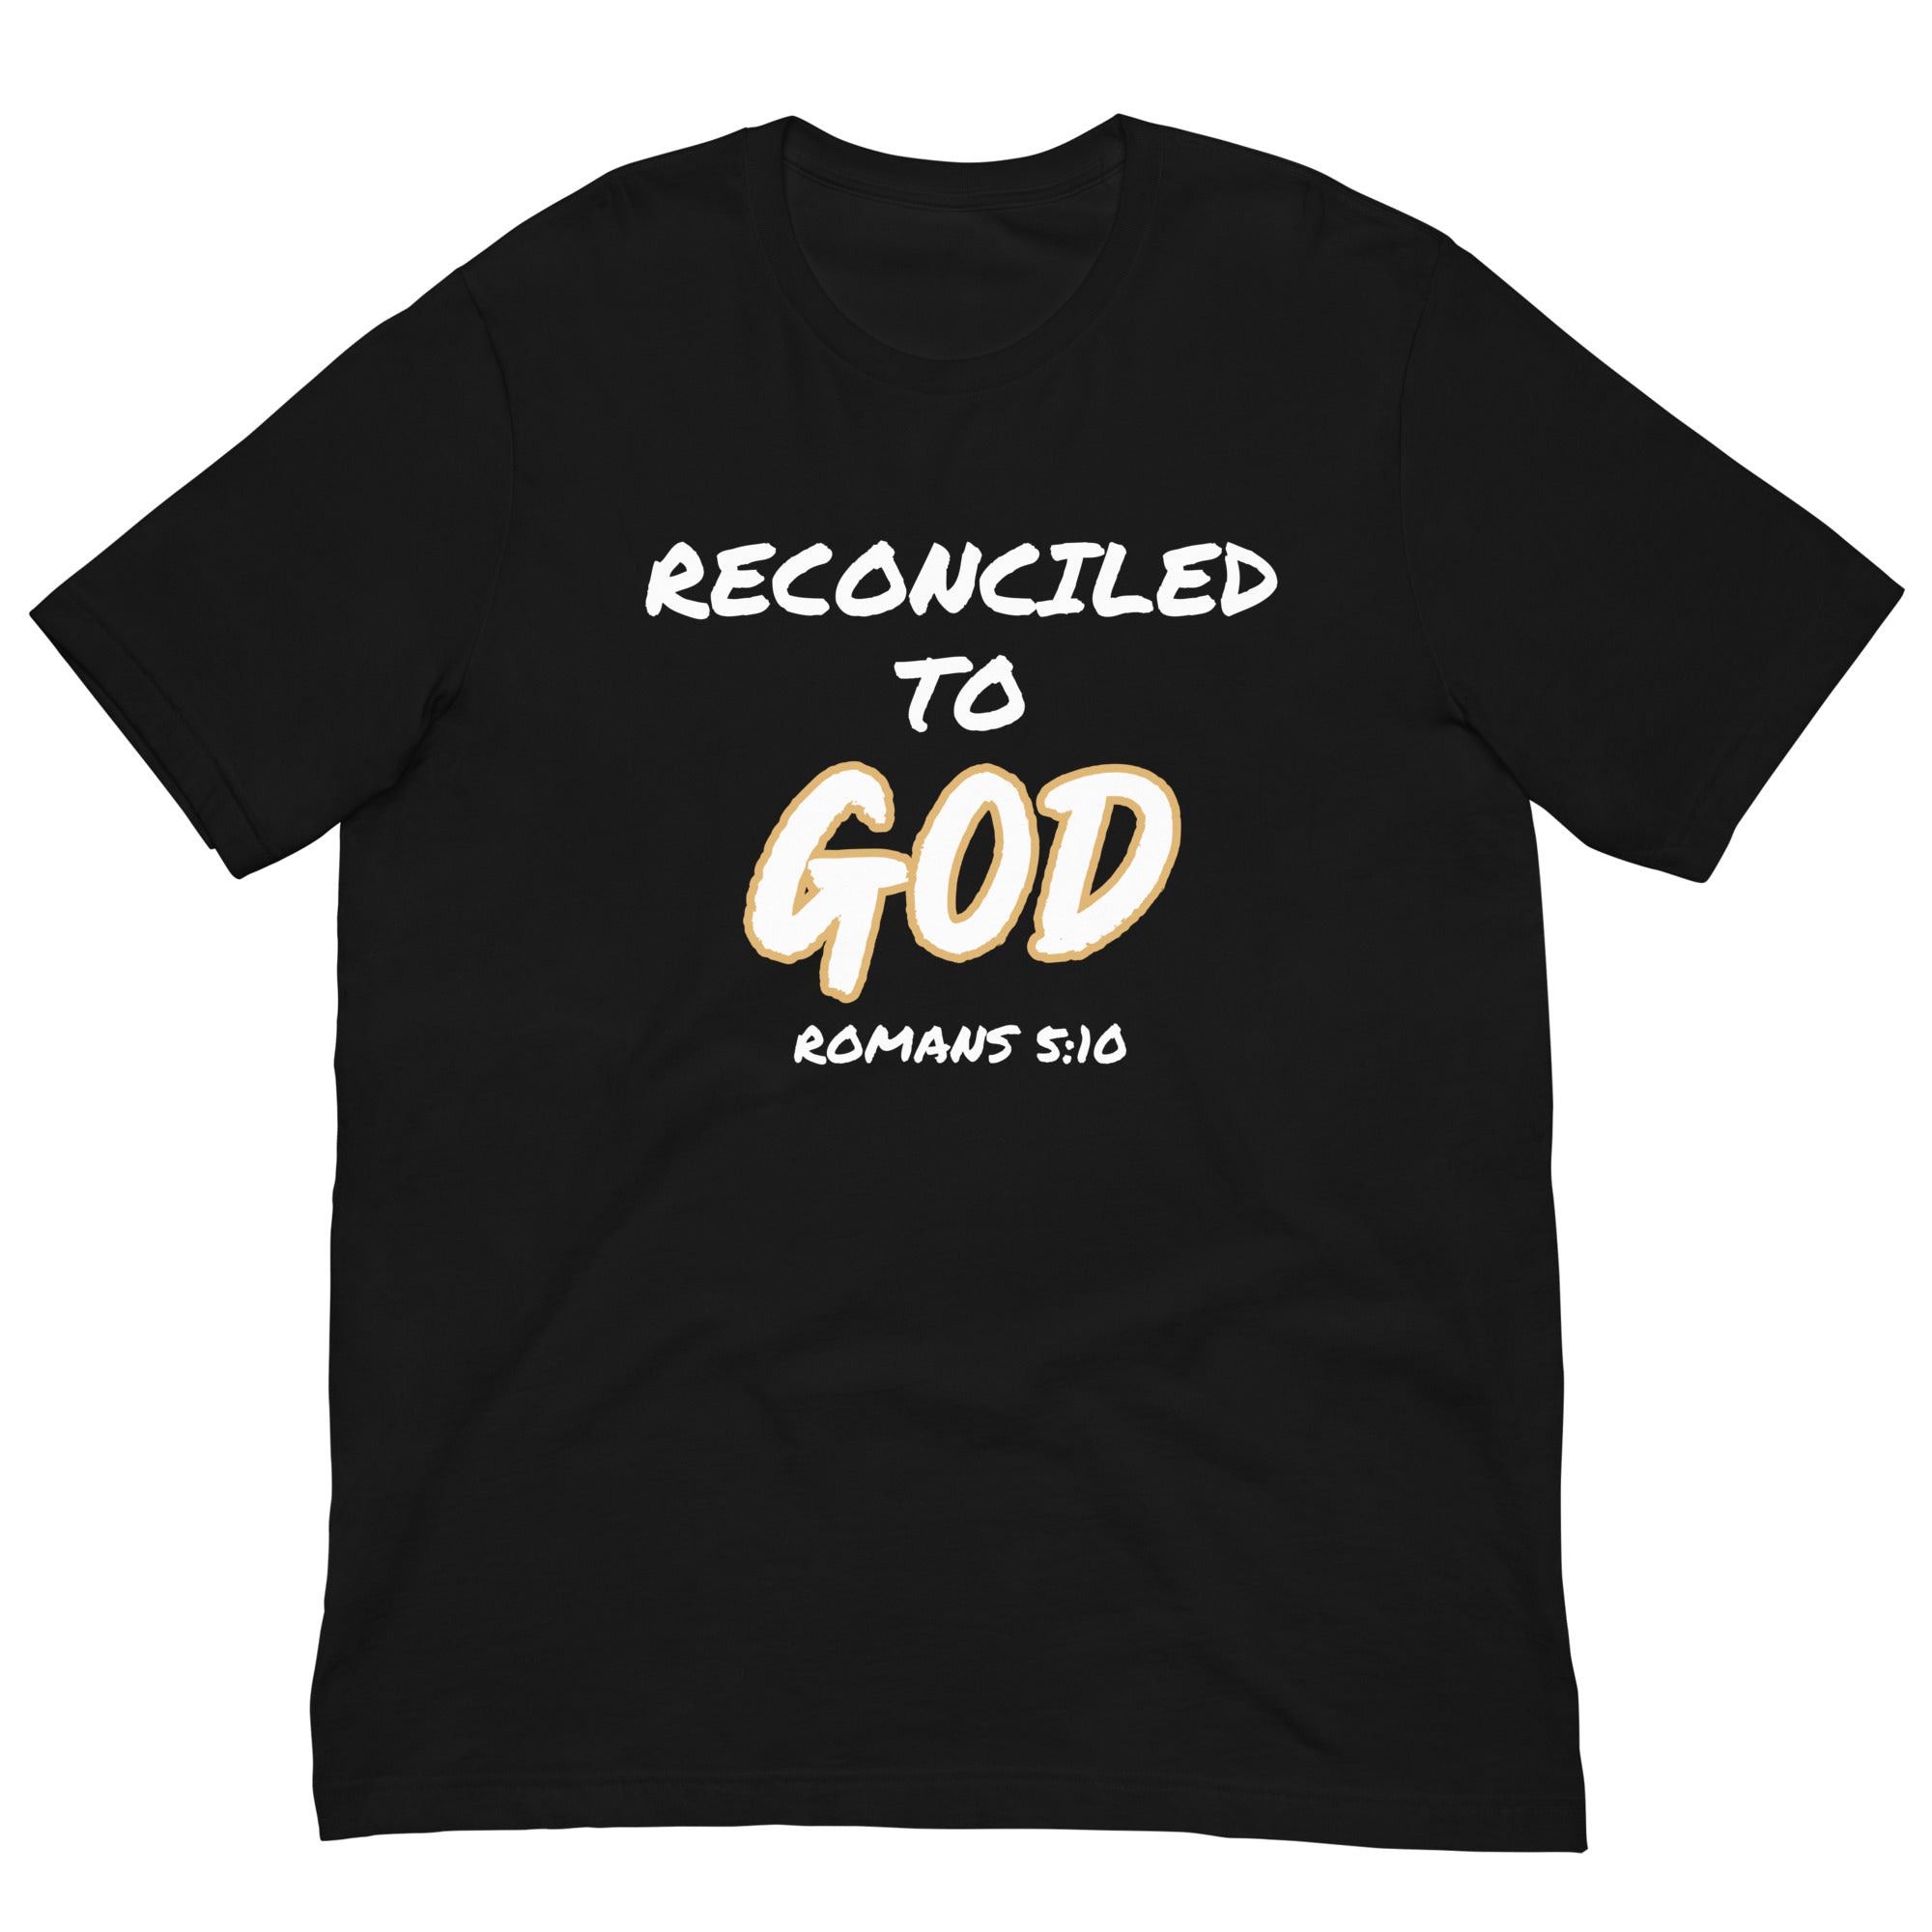 Reconciled to God Unisex t-shirt